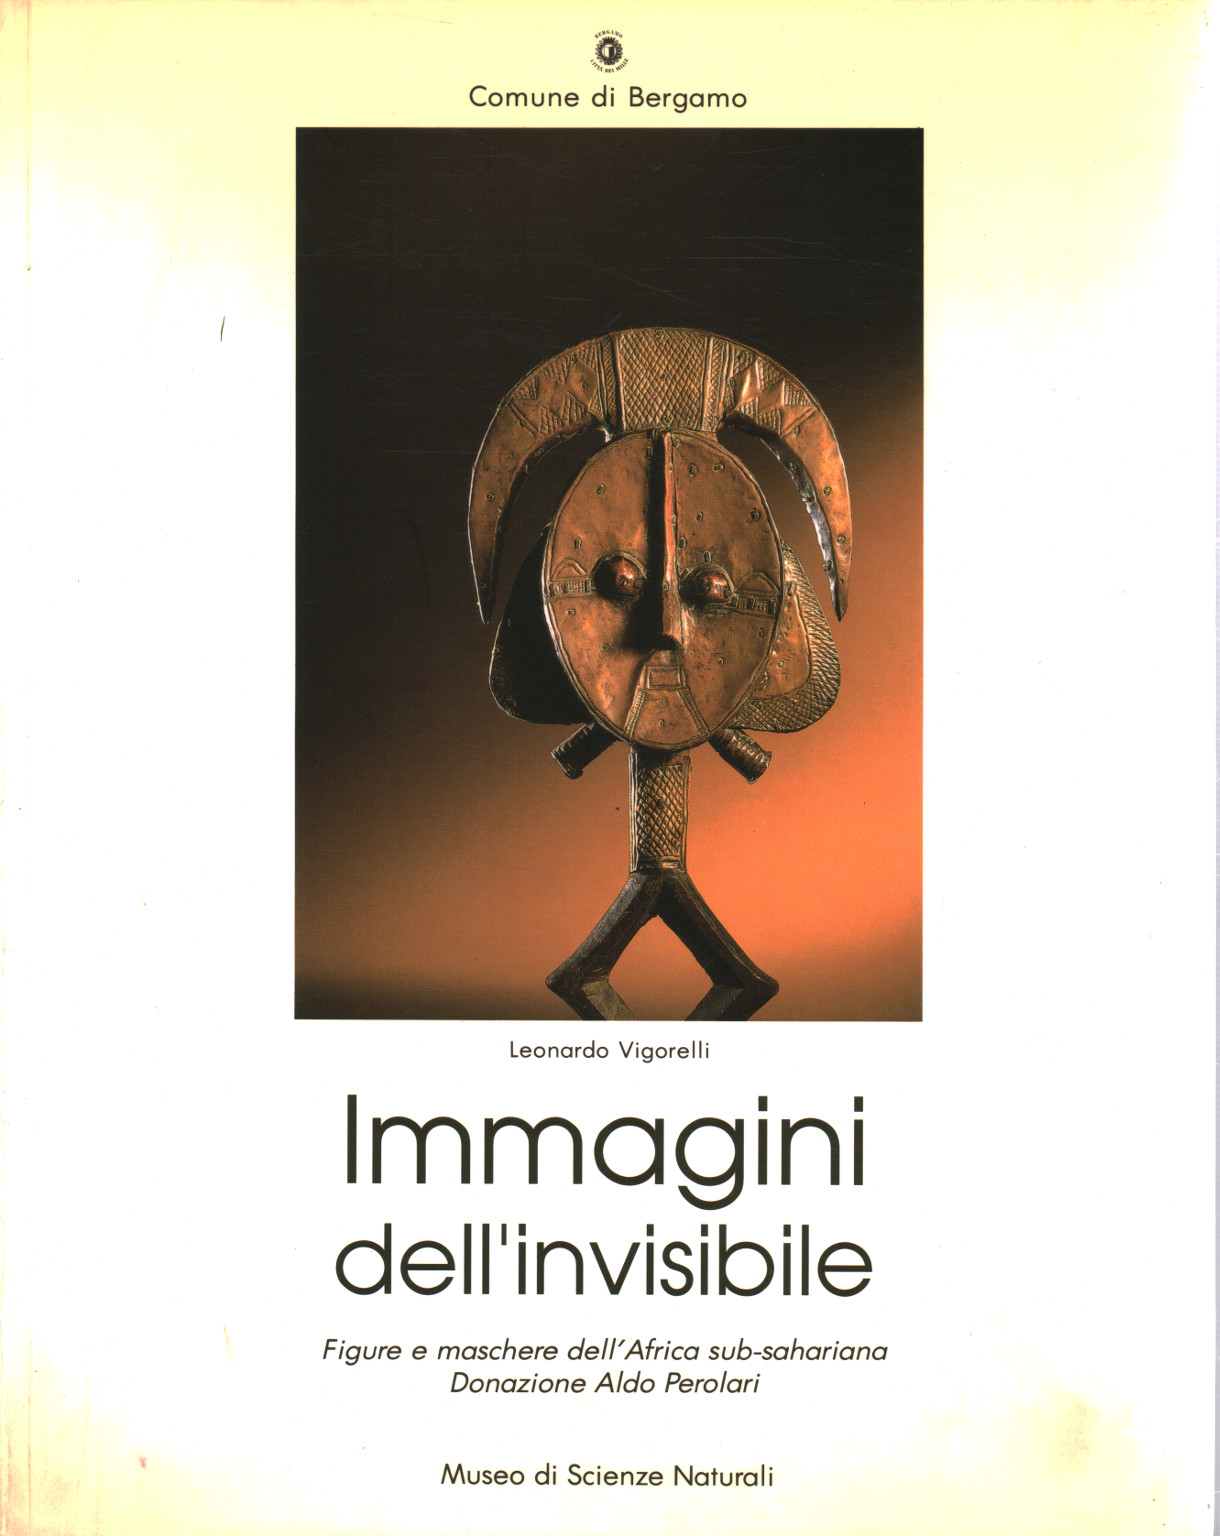 Images of the invisible